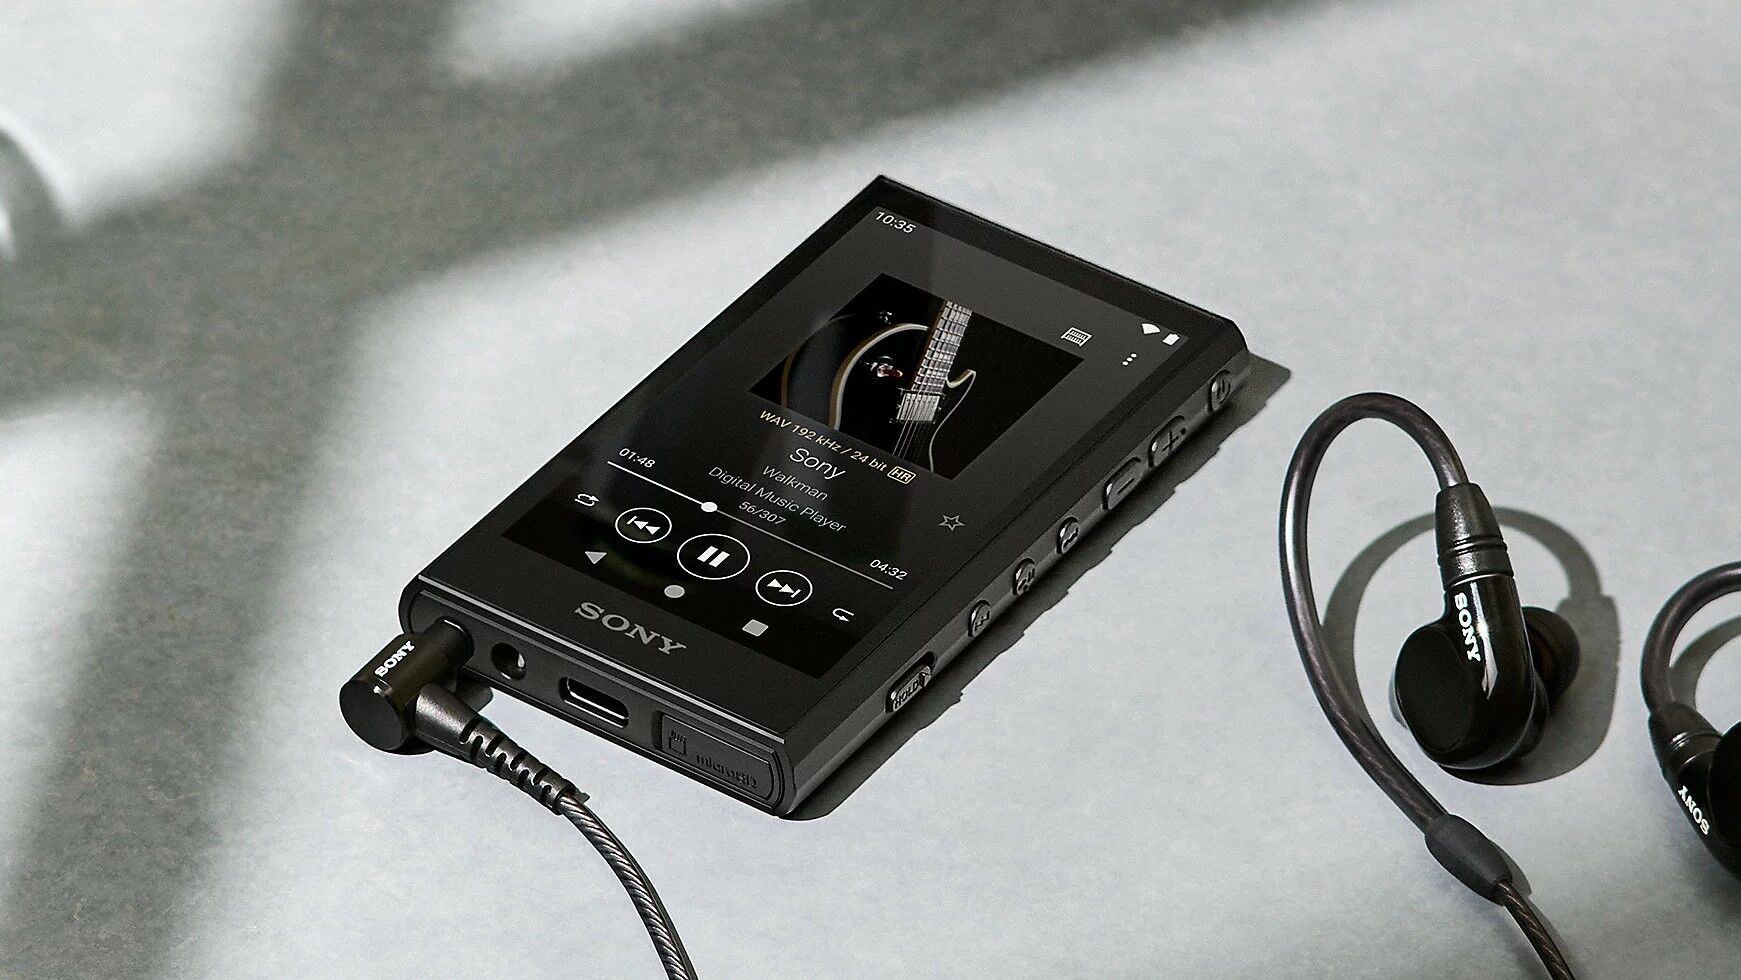 Sony Brings Two New Walkman Models, NW-ZX707 & NW-A306 29